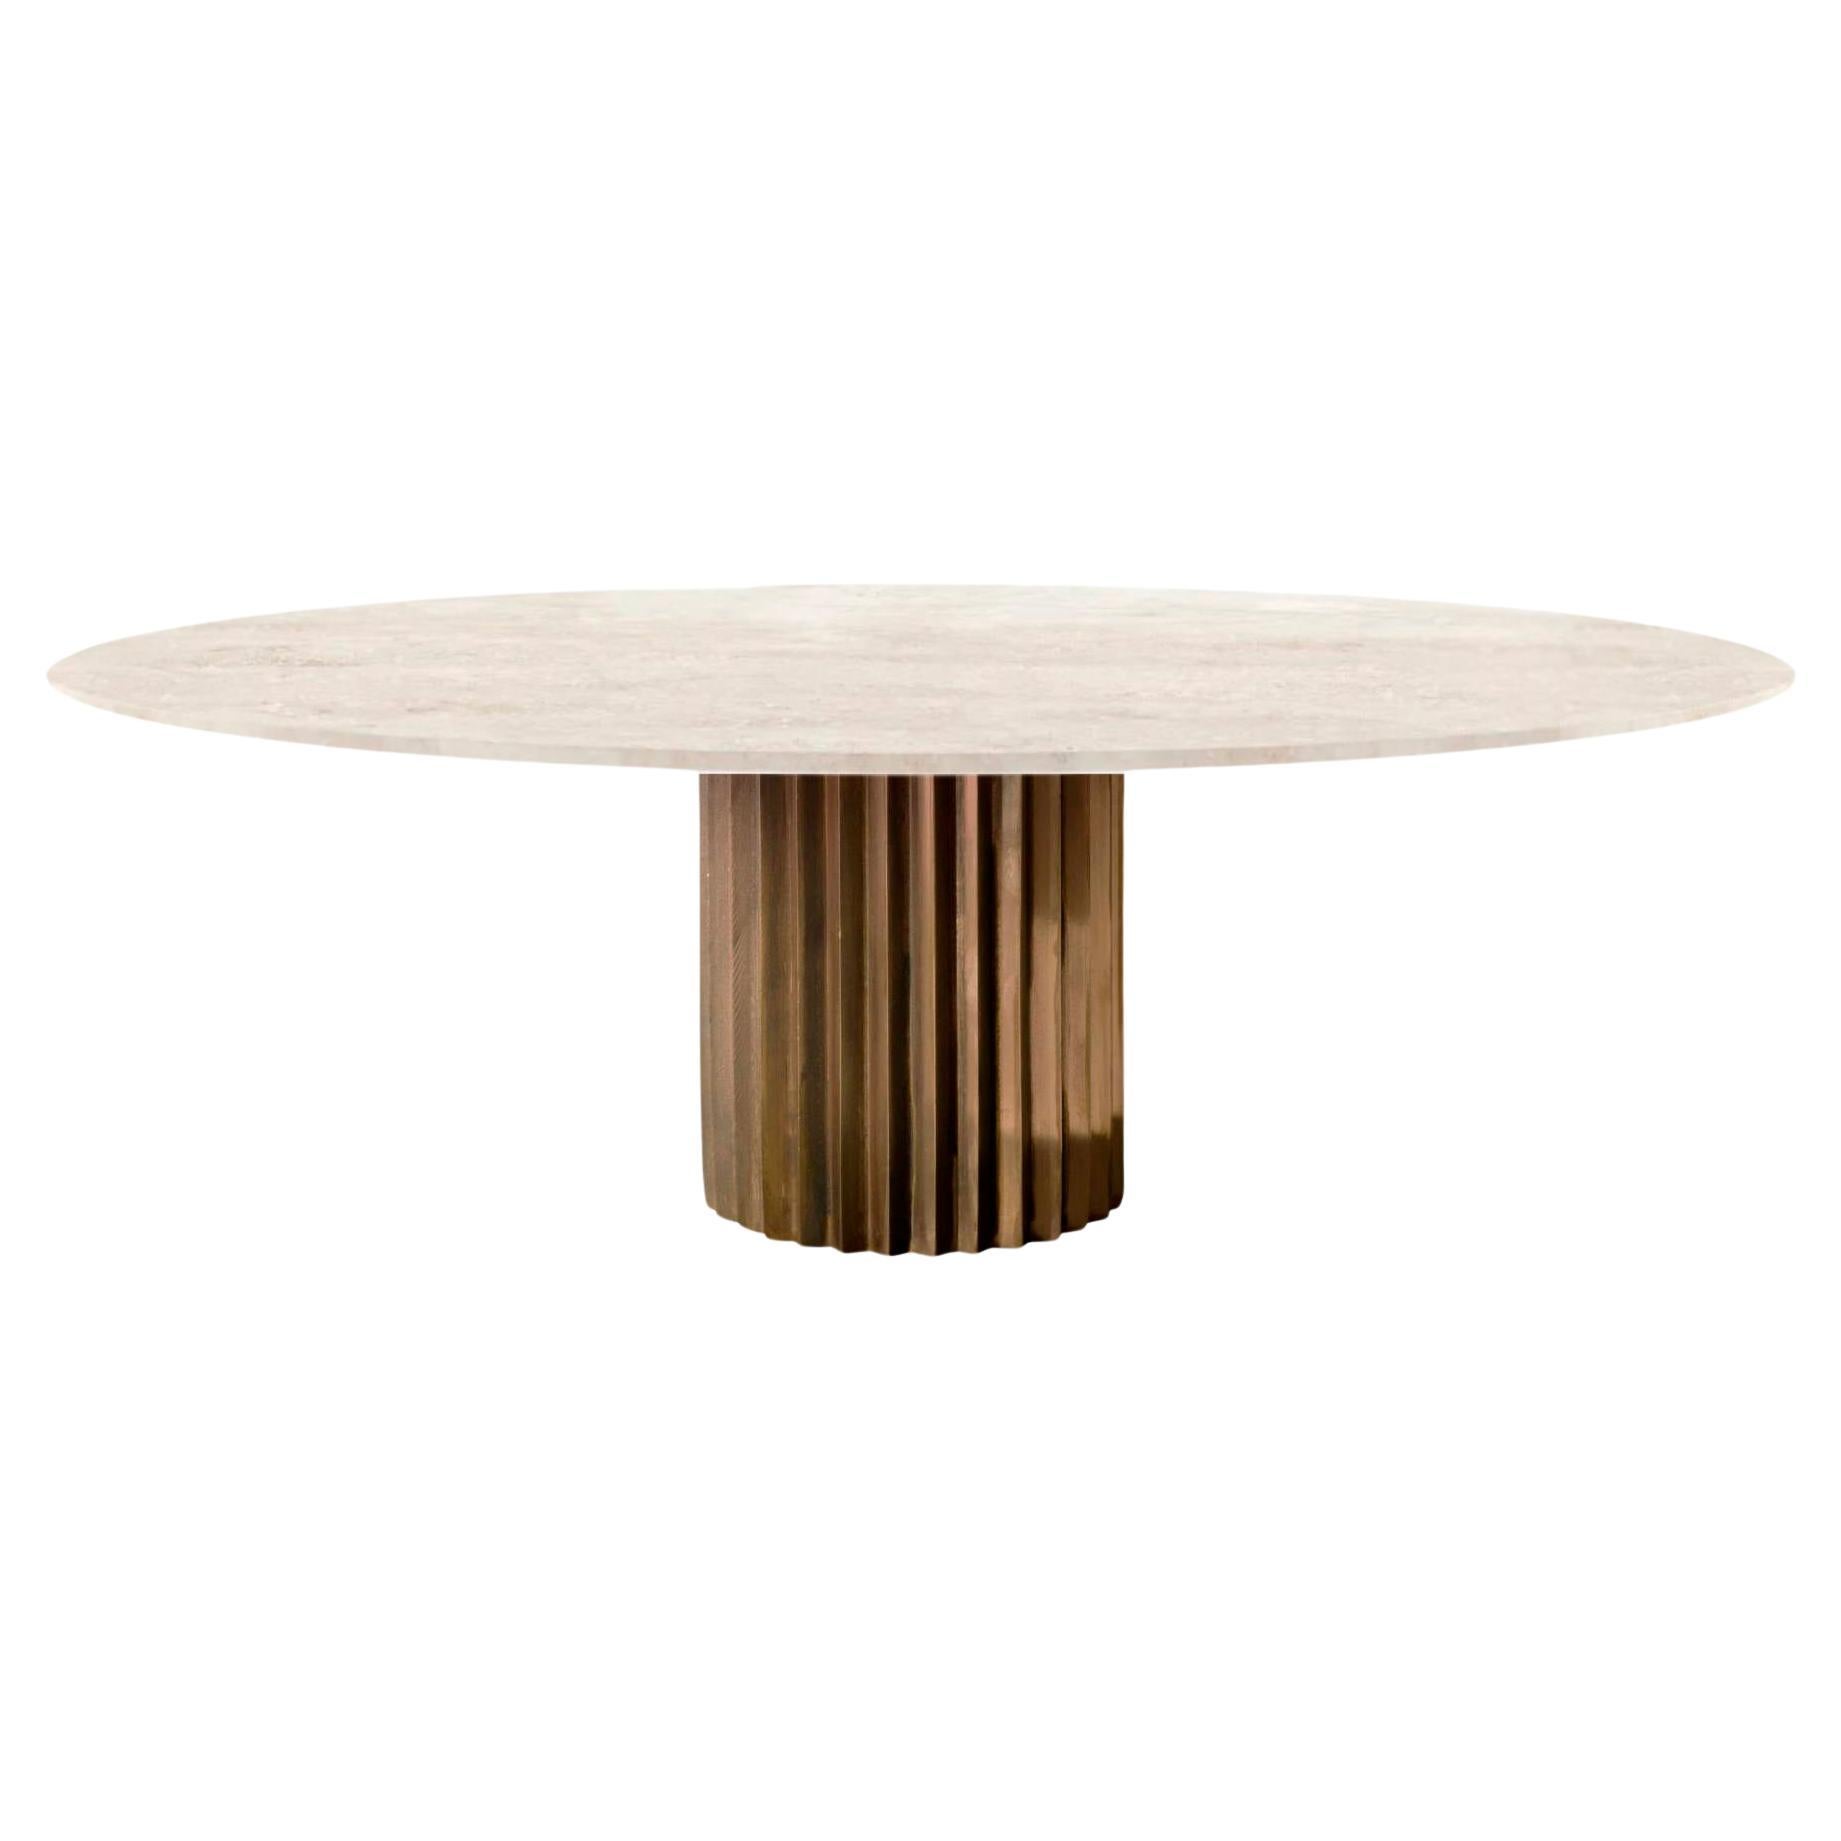 Doris Oval Pedestal Dining Table in Travertine and Cast Bronze by Fred&Juul